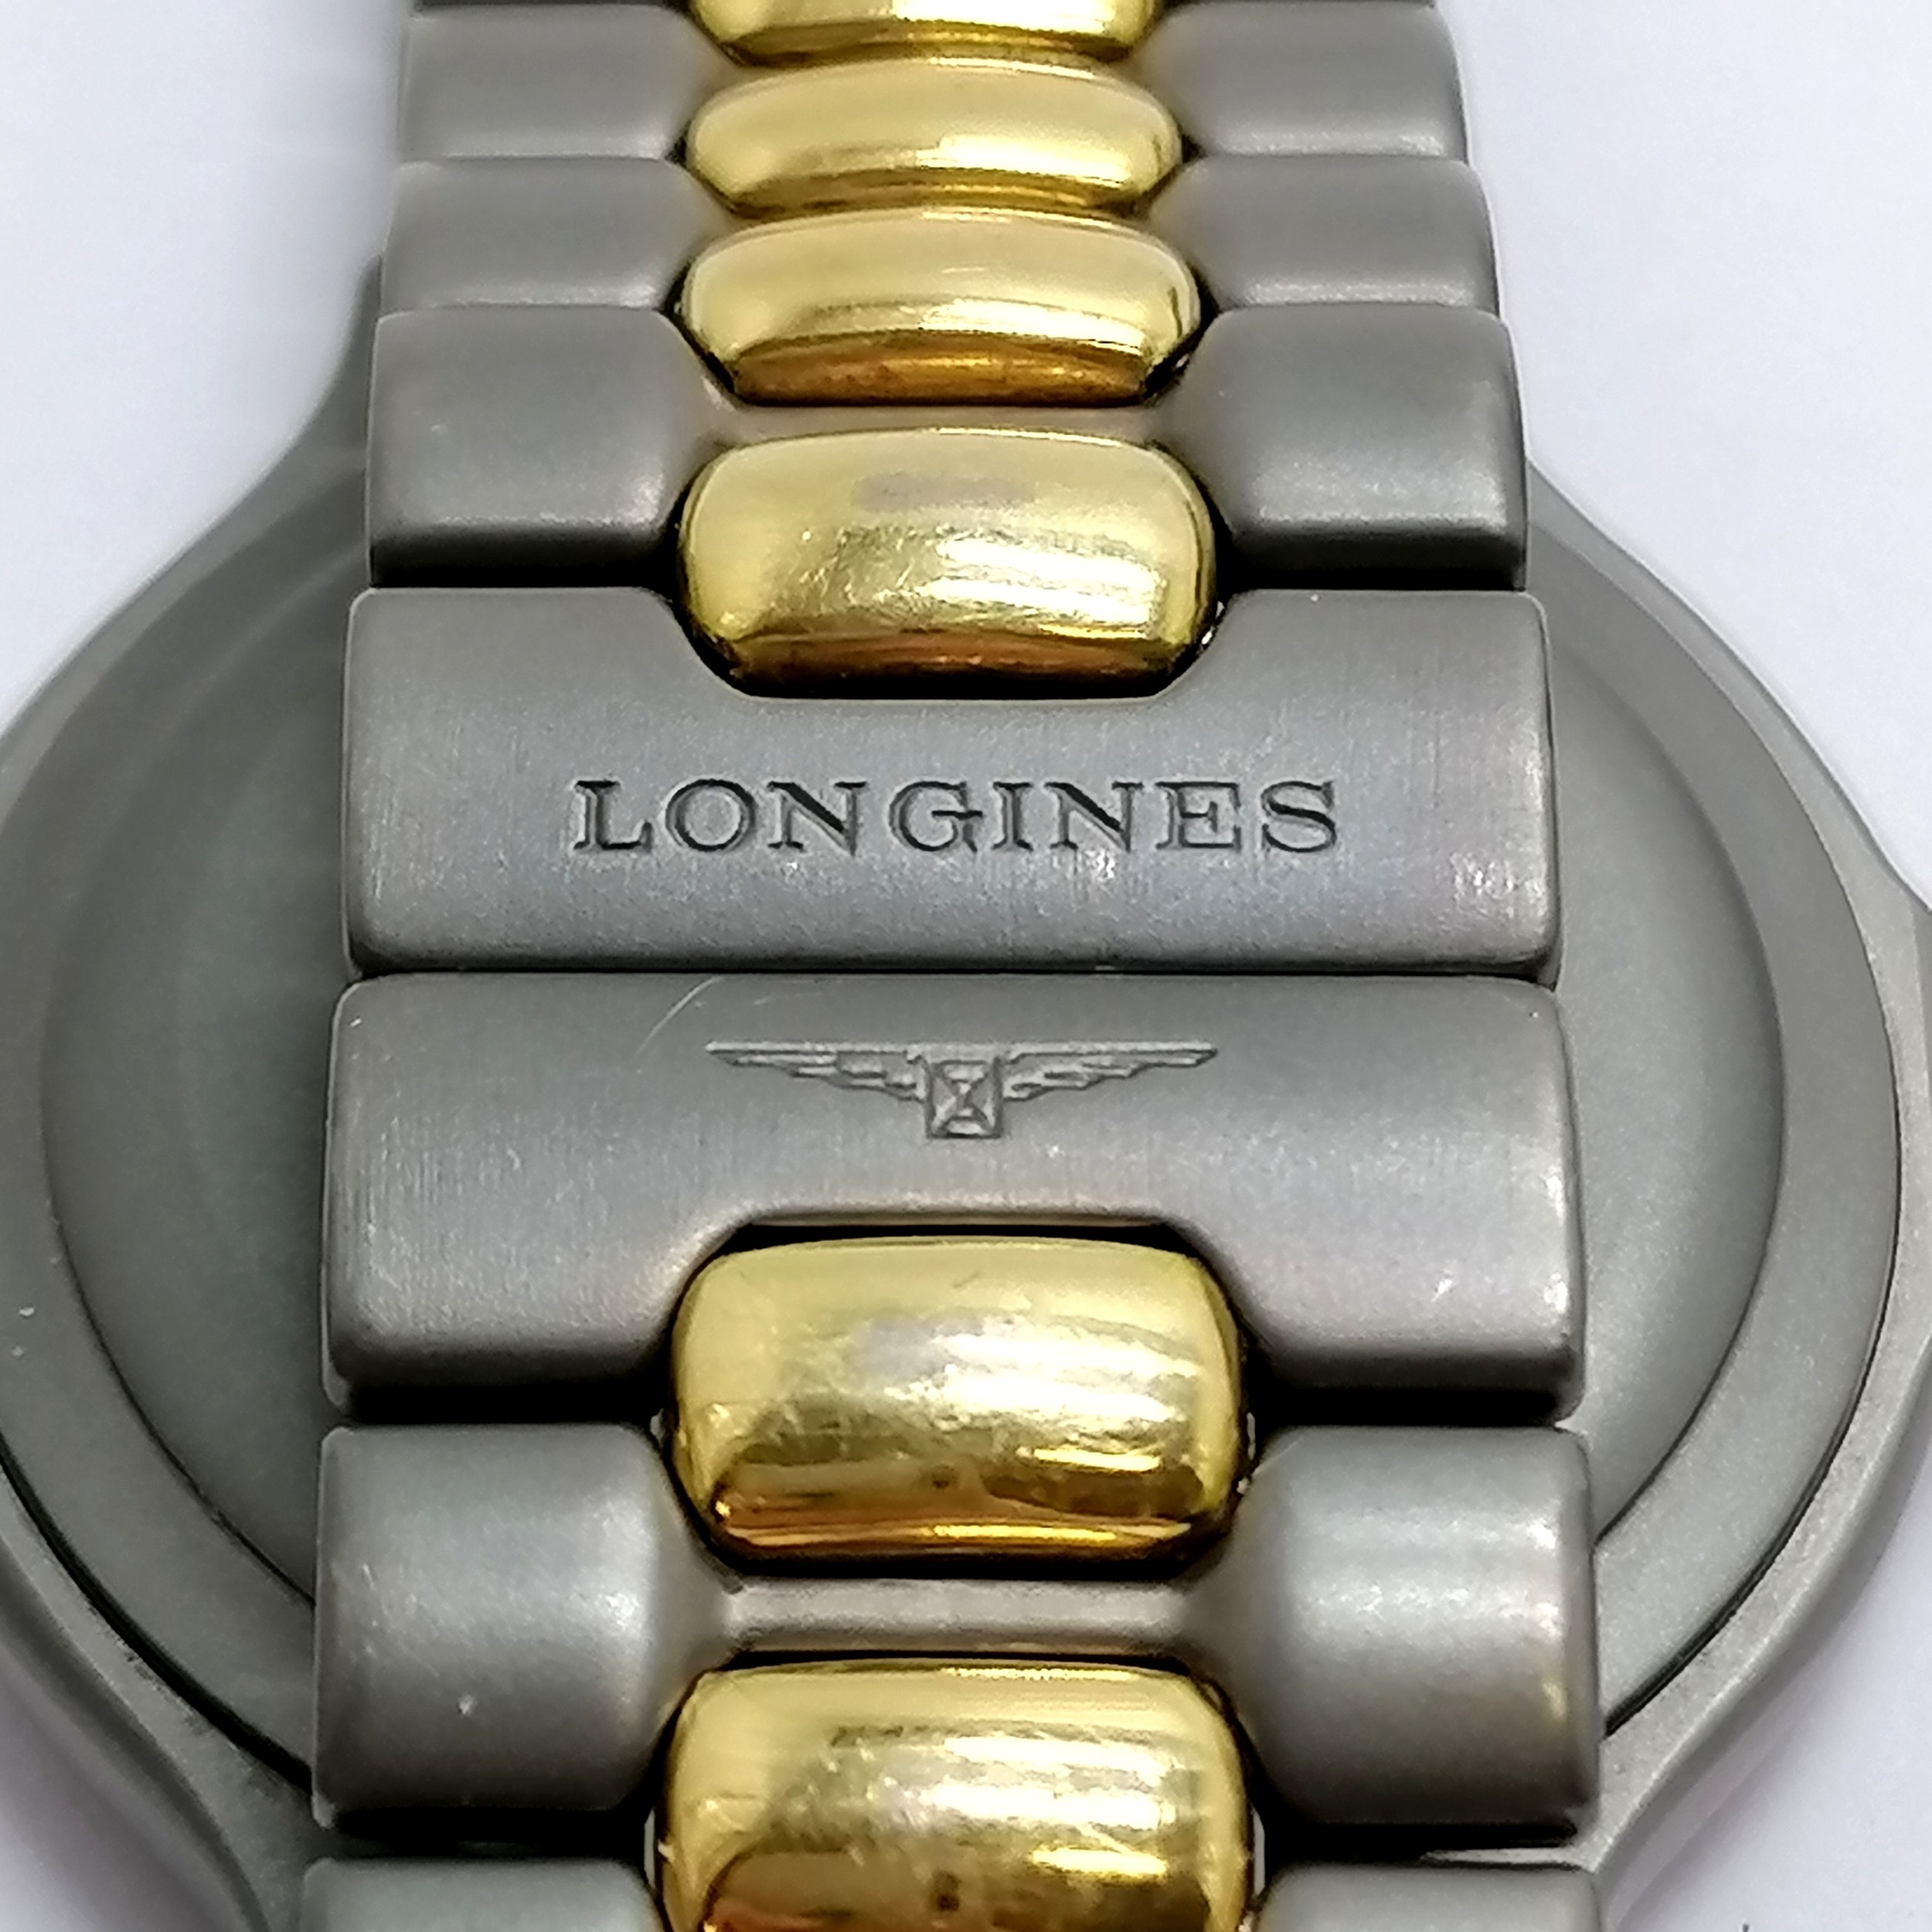 Longines conquest titanium quartz wristwatch (34mm case) - will need battery - SOLD ON BEHALF OF THE - Image 3 of 6